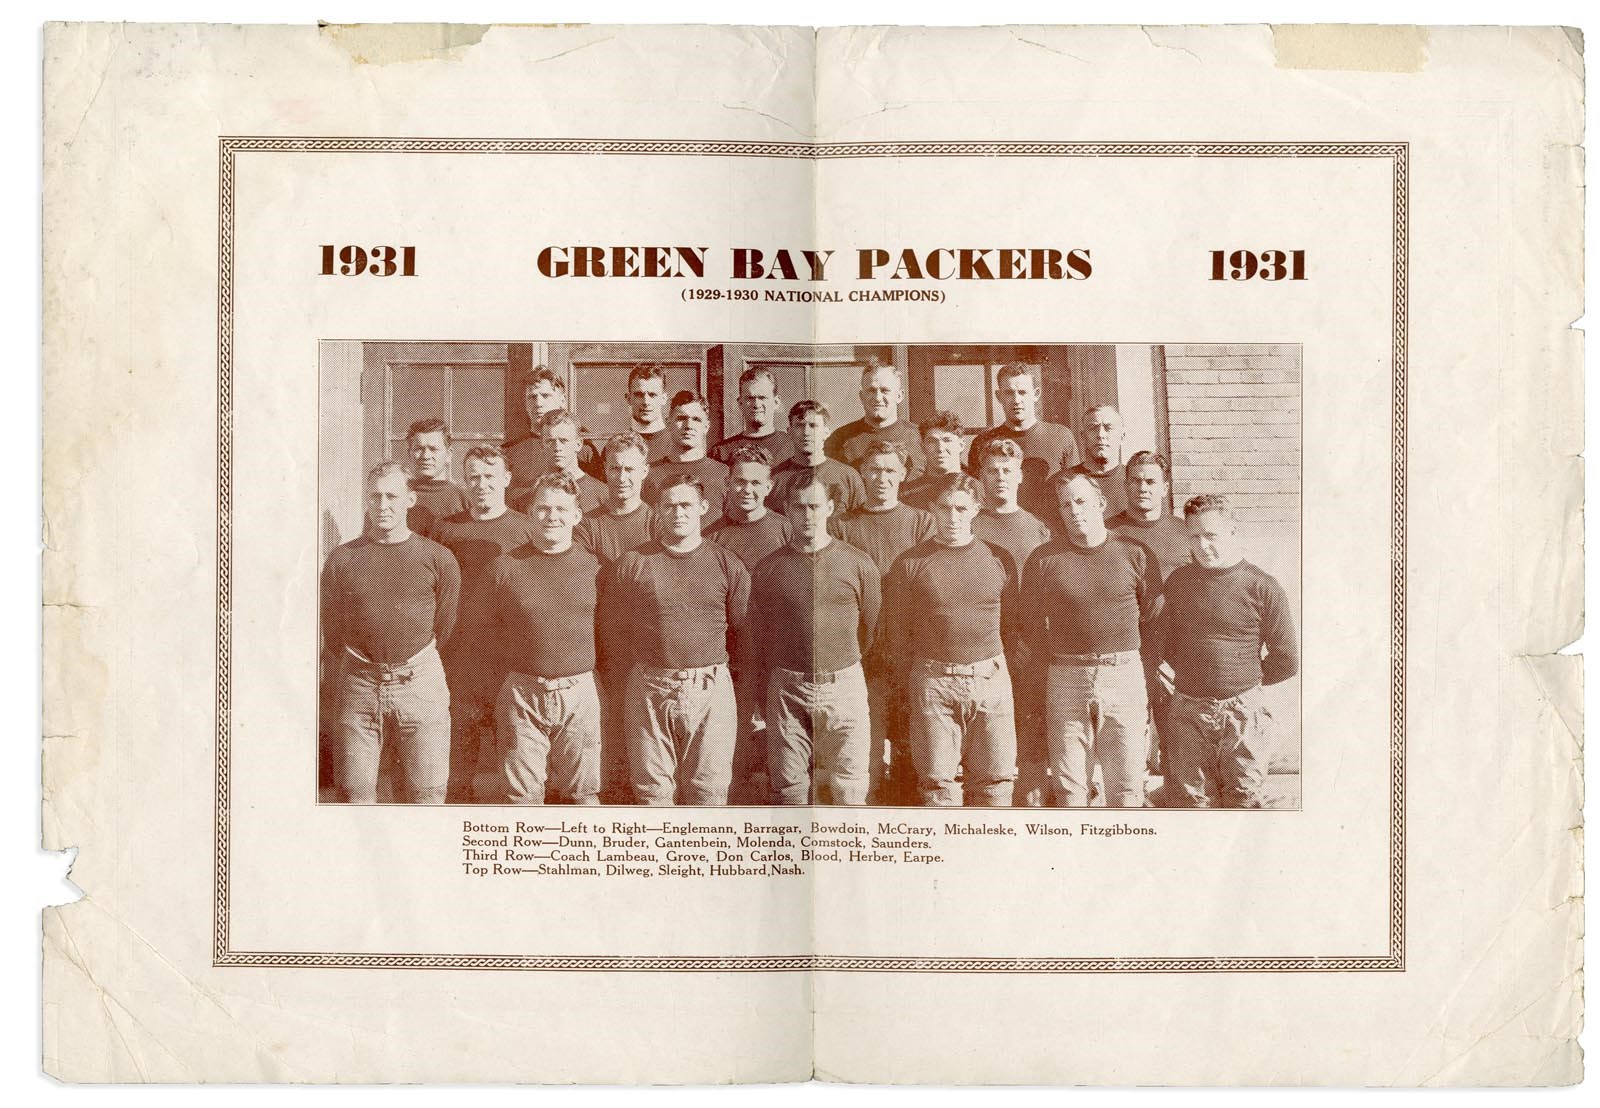 1931 Green Bay Packers Large Fold-Out Away Schedule with Team Photo